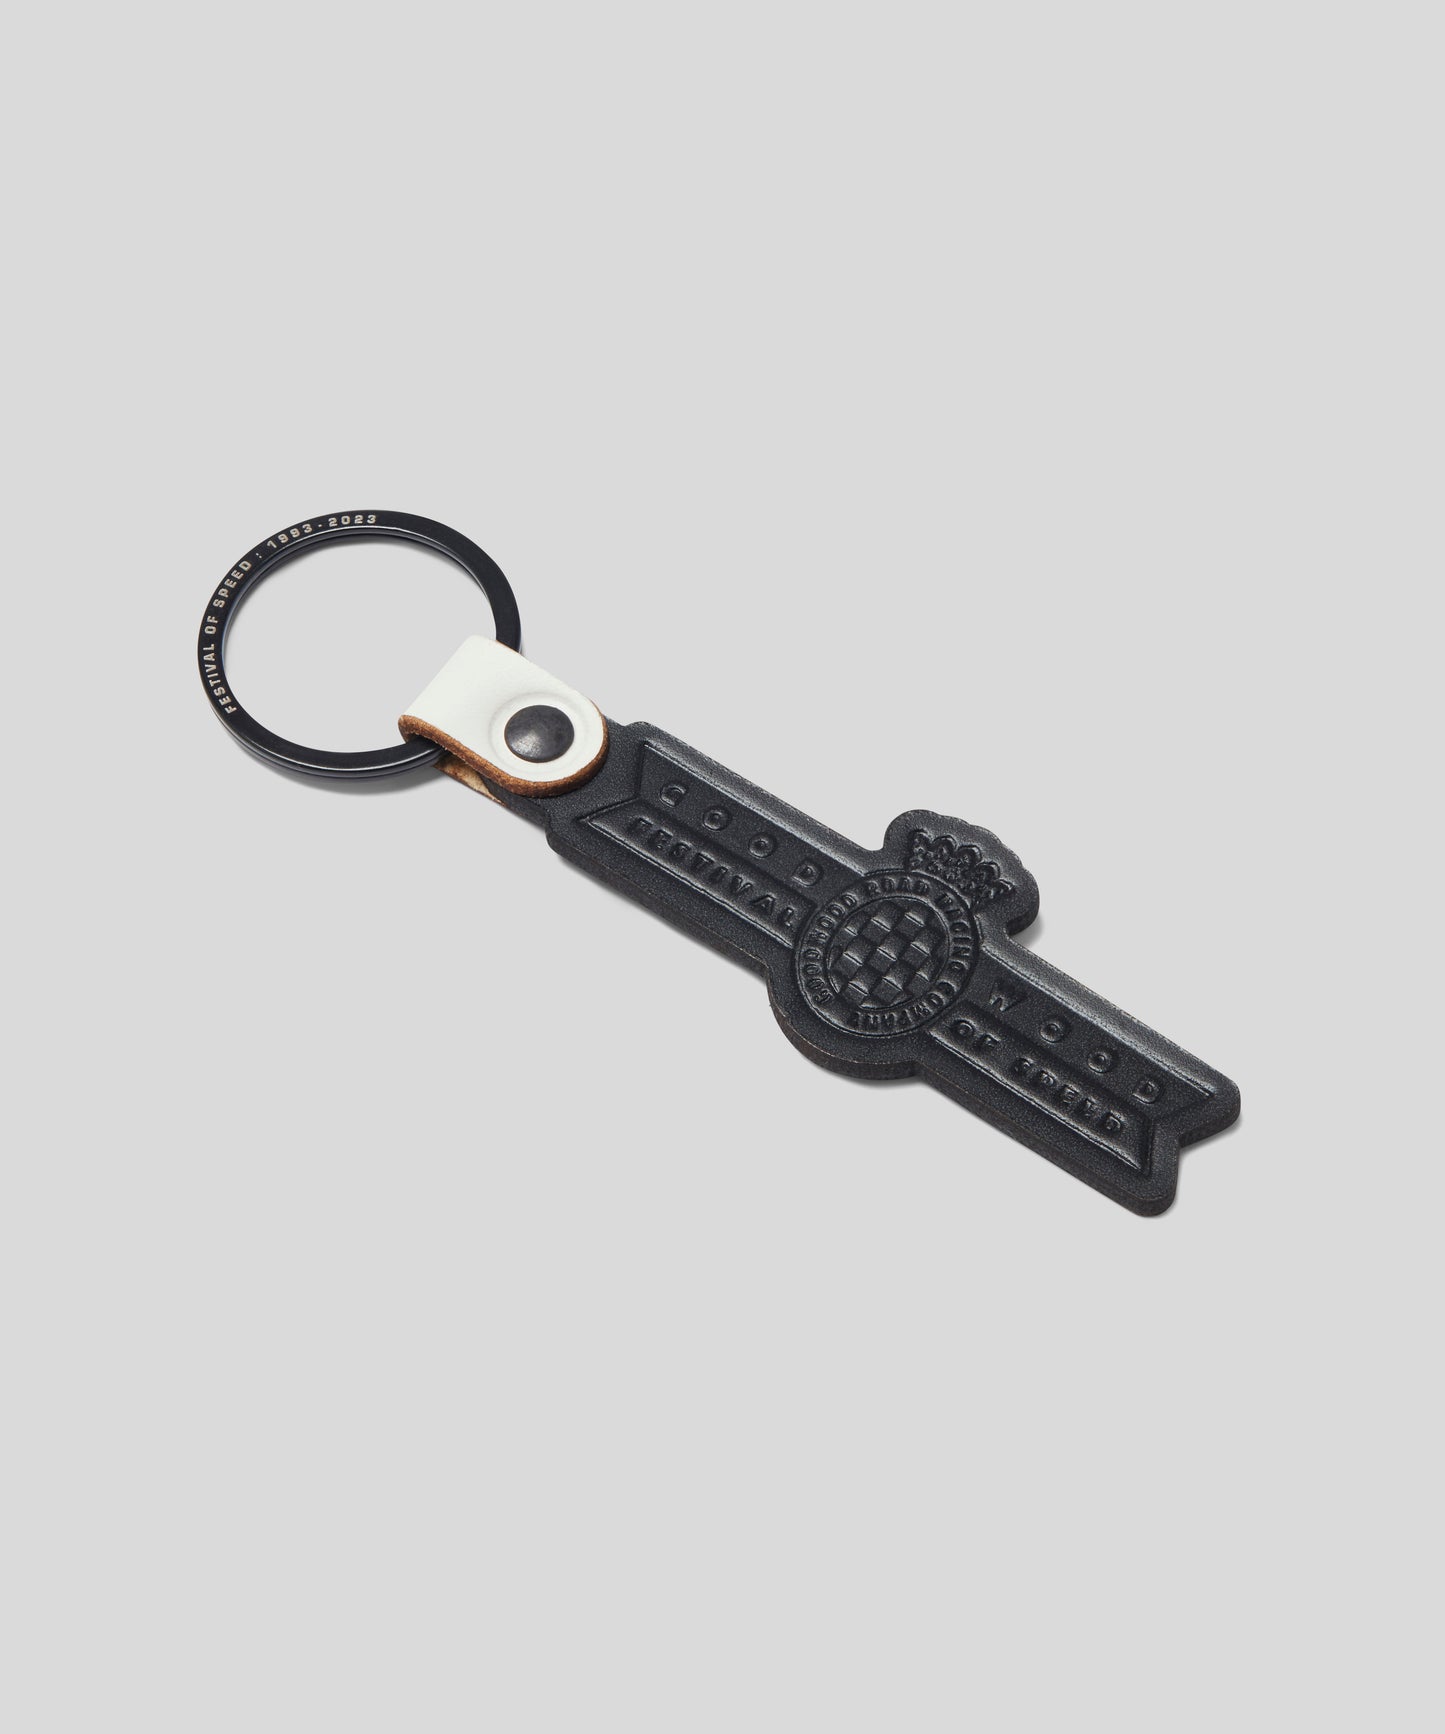 Goodwood Festival of Speed Leather Key Ring